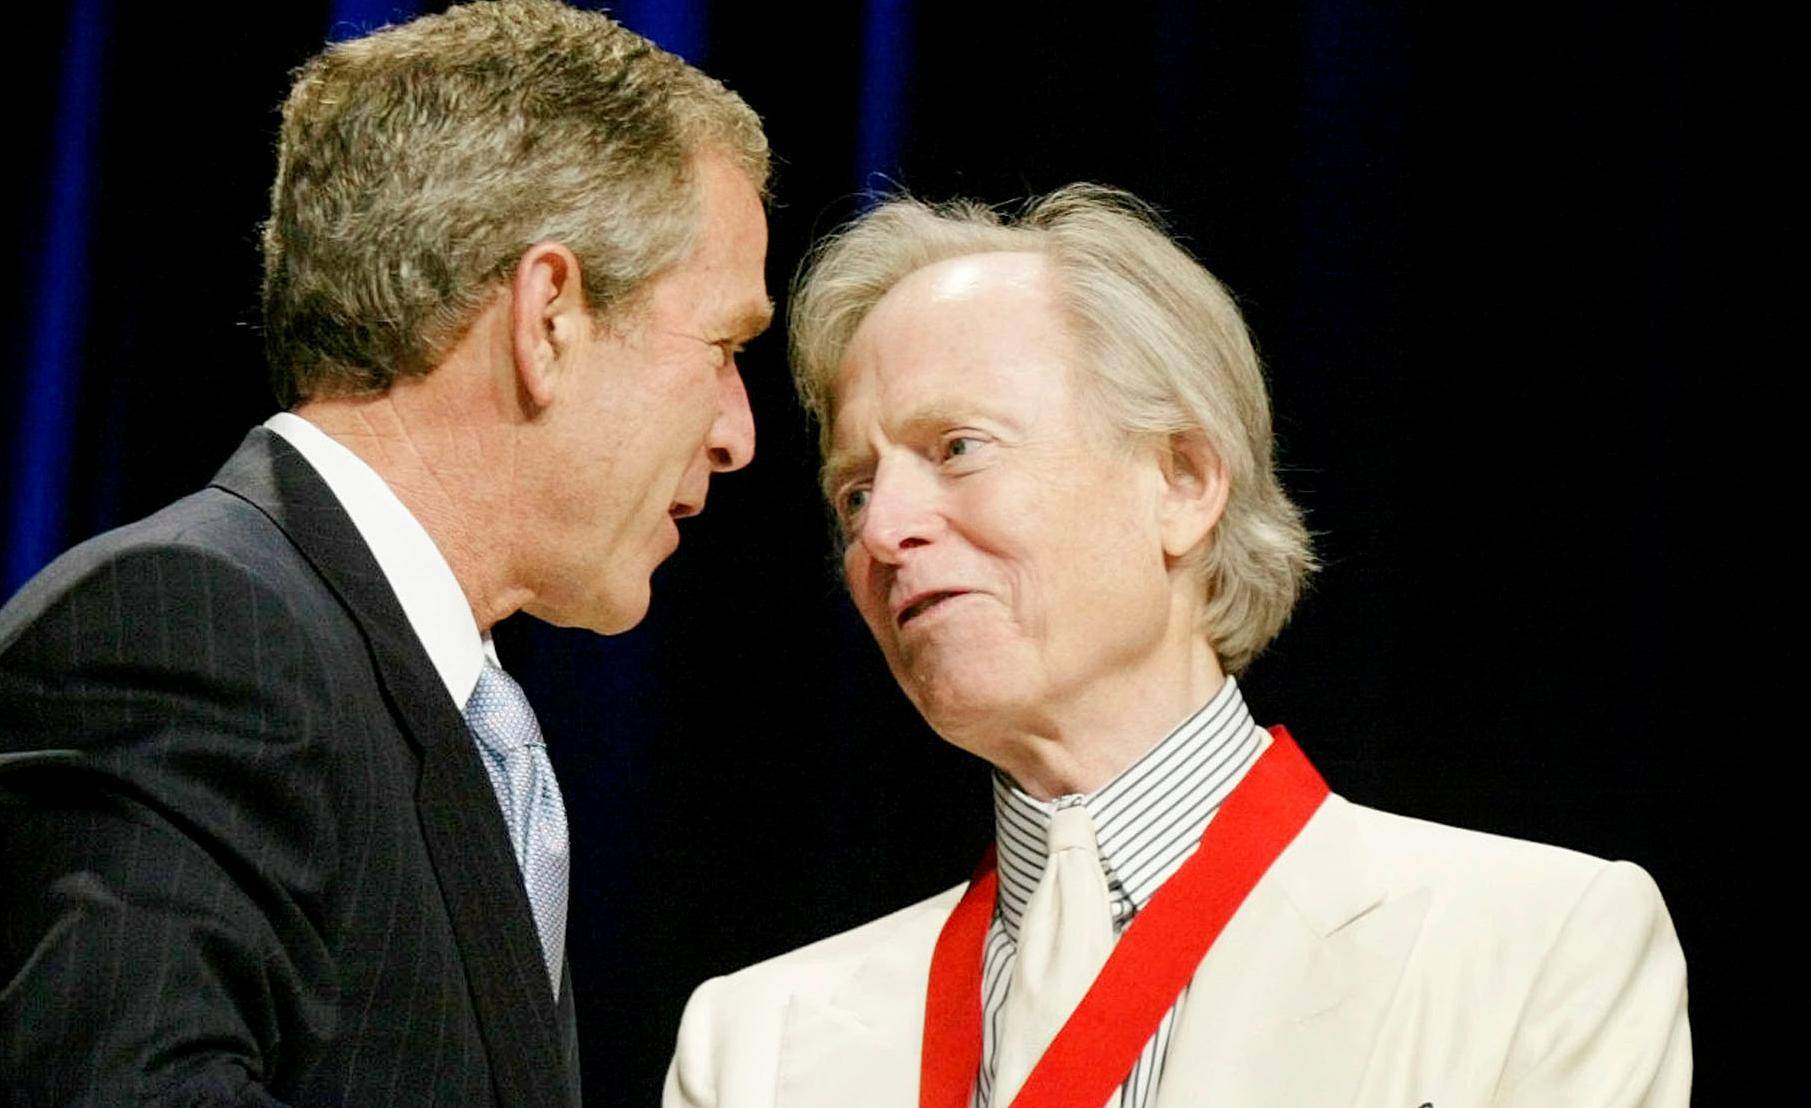 FILE PHOTO: Author Wolfe stands with U.S. President George W. Bush in Washington